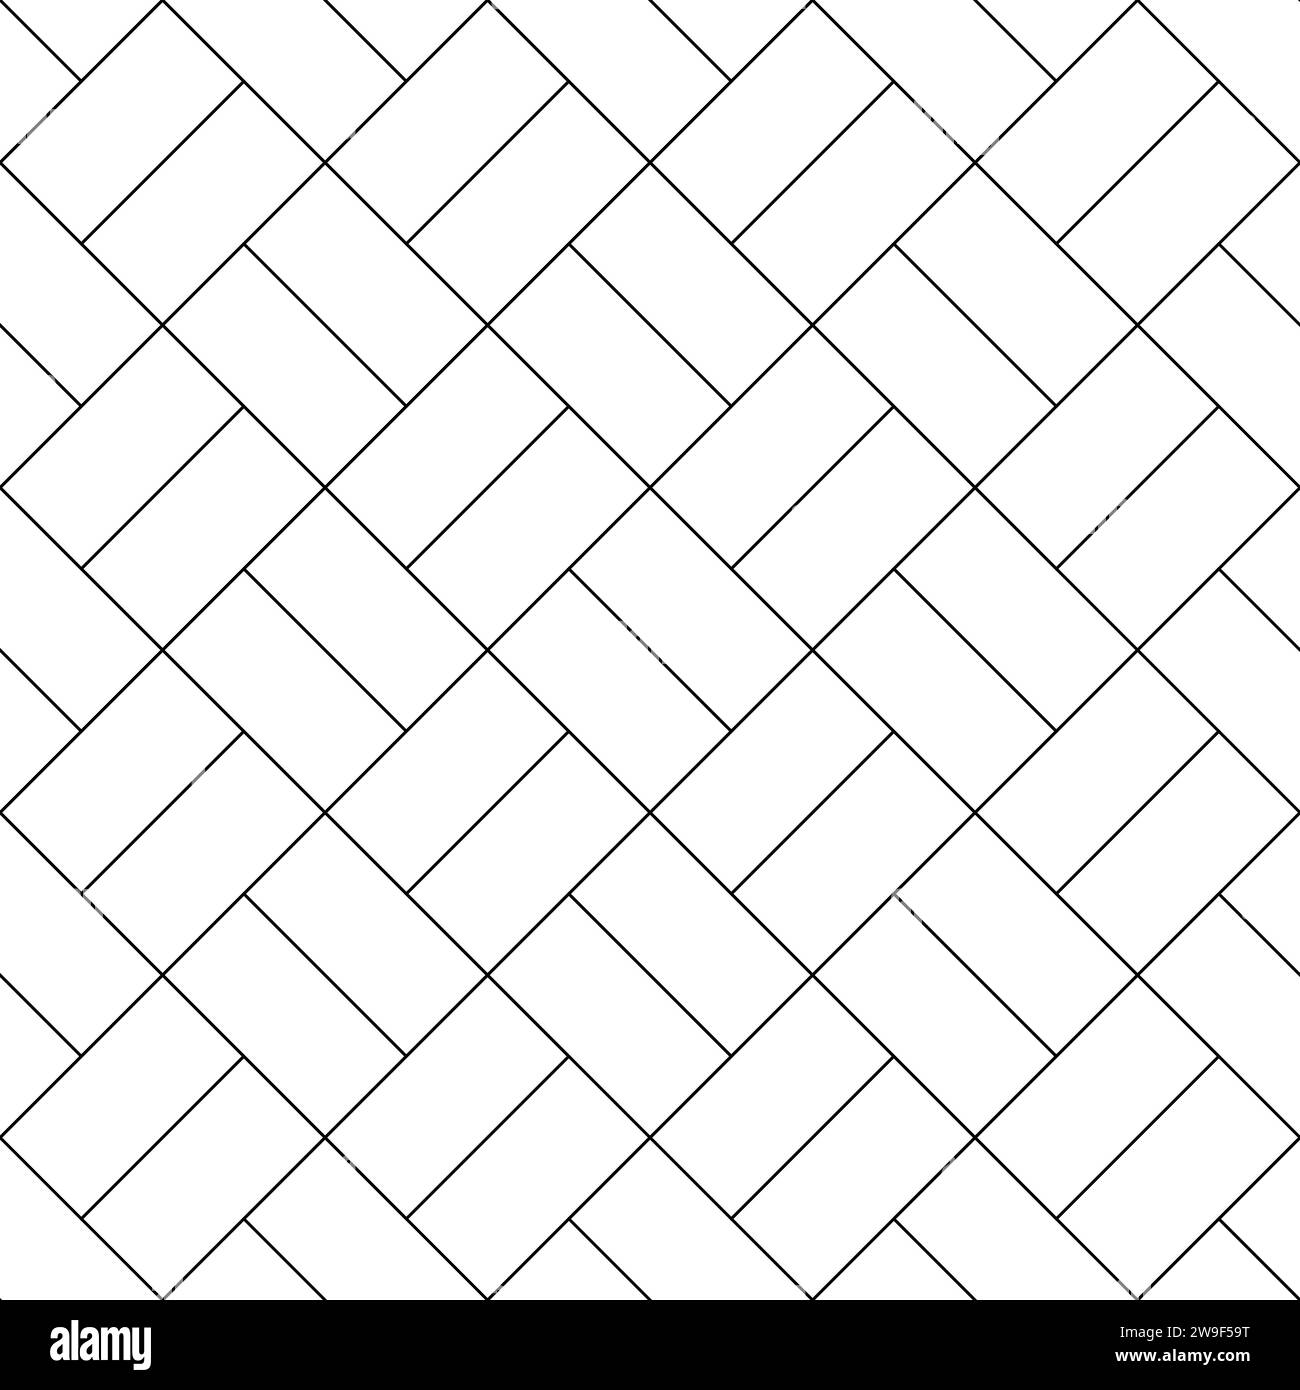 Brick parquet seamless pattern. Repeating rectangles slab surface. Tiling repeat floor. Repeated paving grid for design prints. Black masonry plank Stock Vector